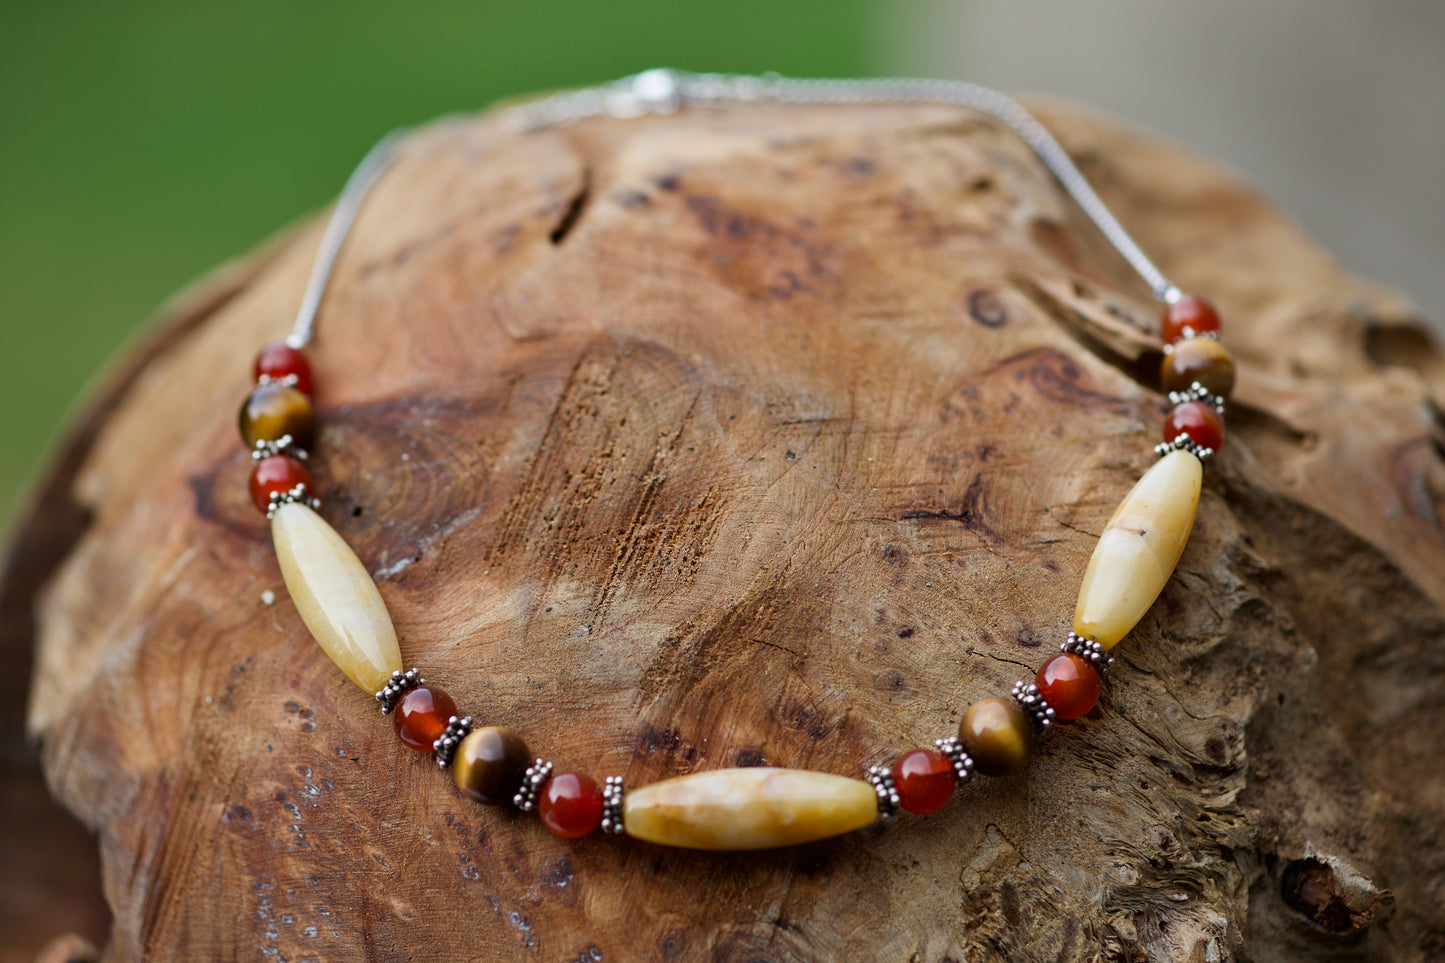 Agate, Carnelian, Tiger Eye, and Sterling Silver Necklace